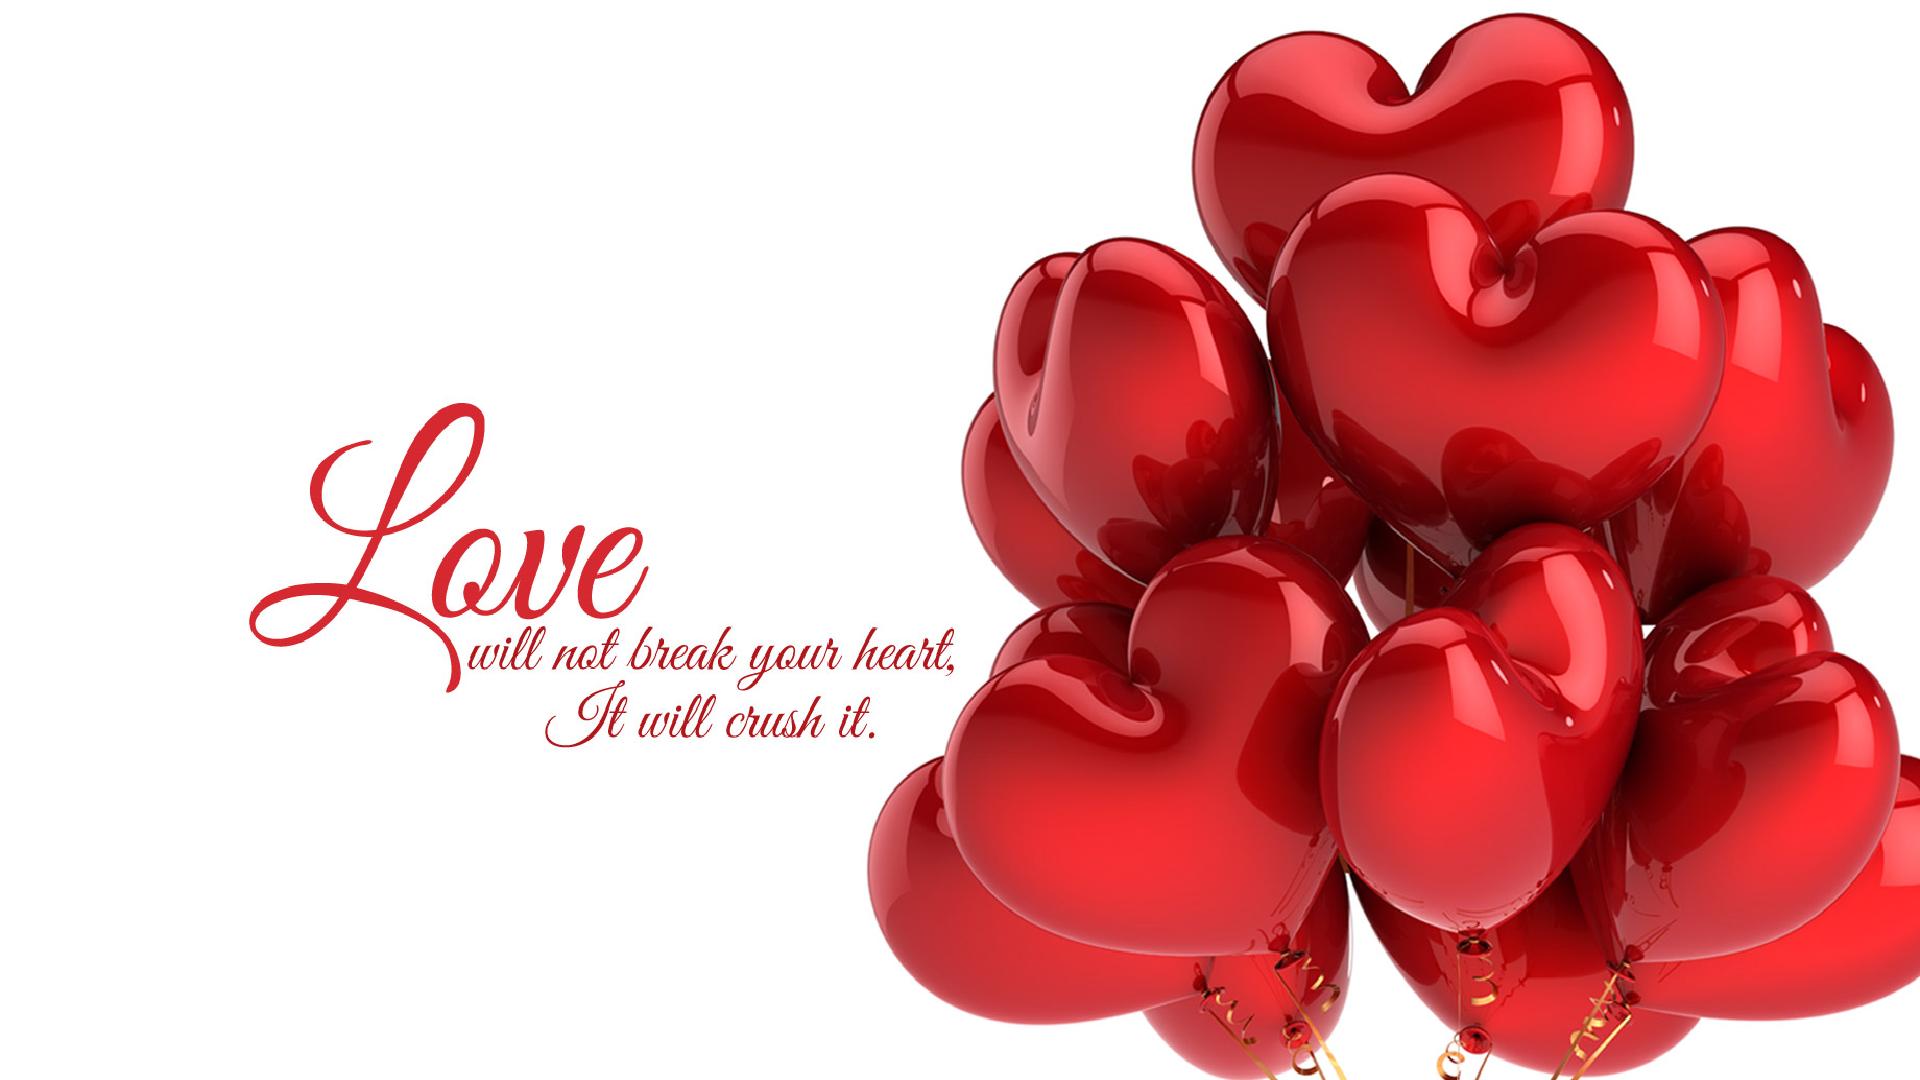 Meaningful Love Quote With Red Hearts Balloons - Heart Good Morning My Love , HD Wallpaper & Backgrounds